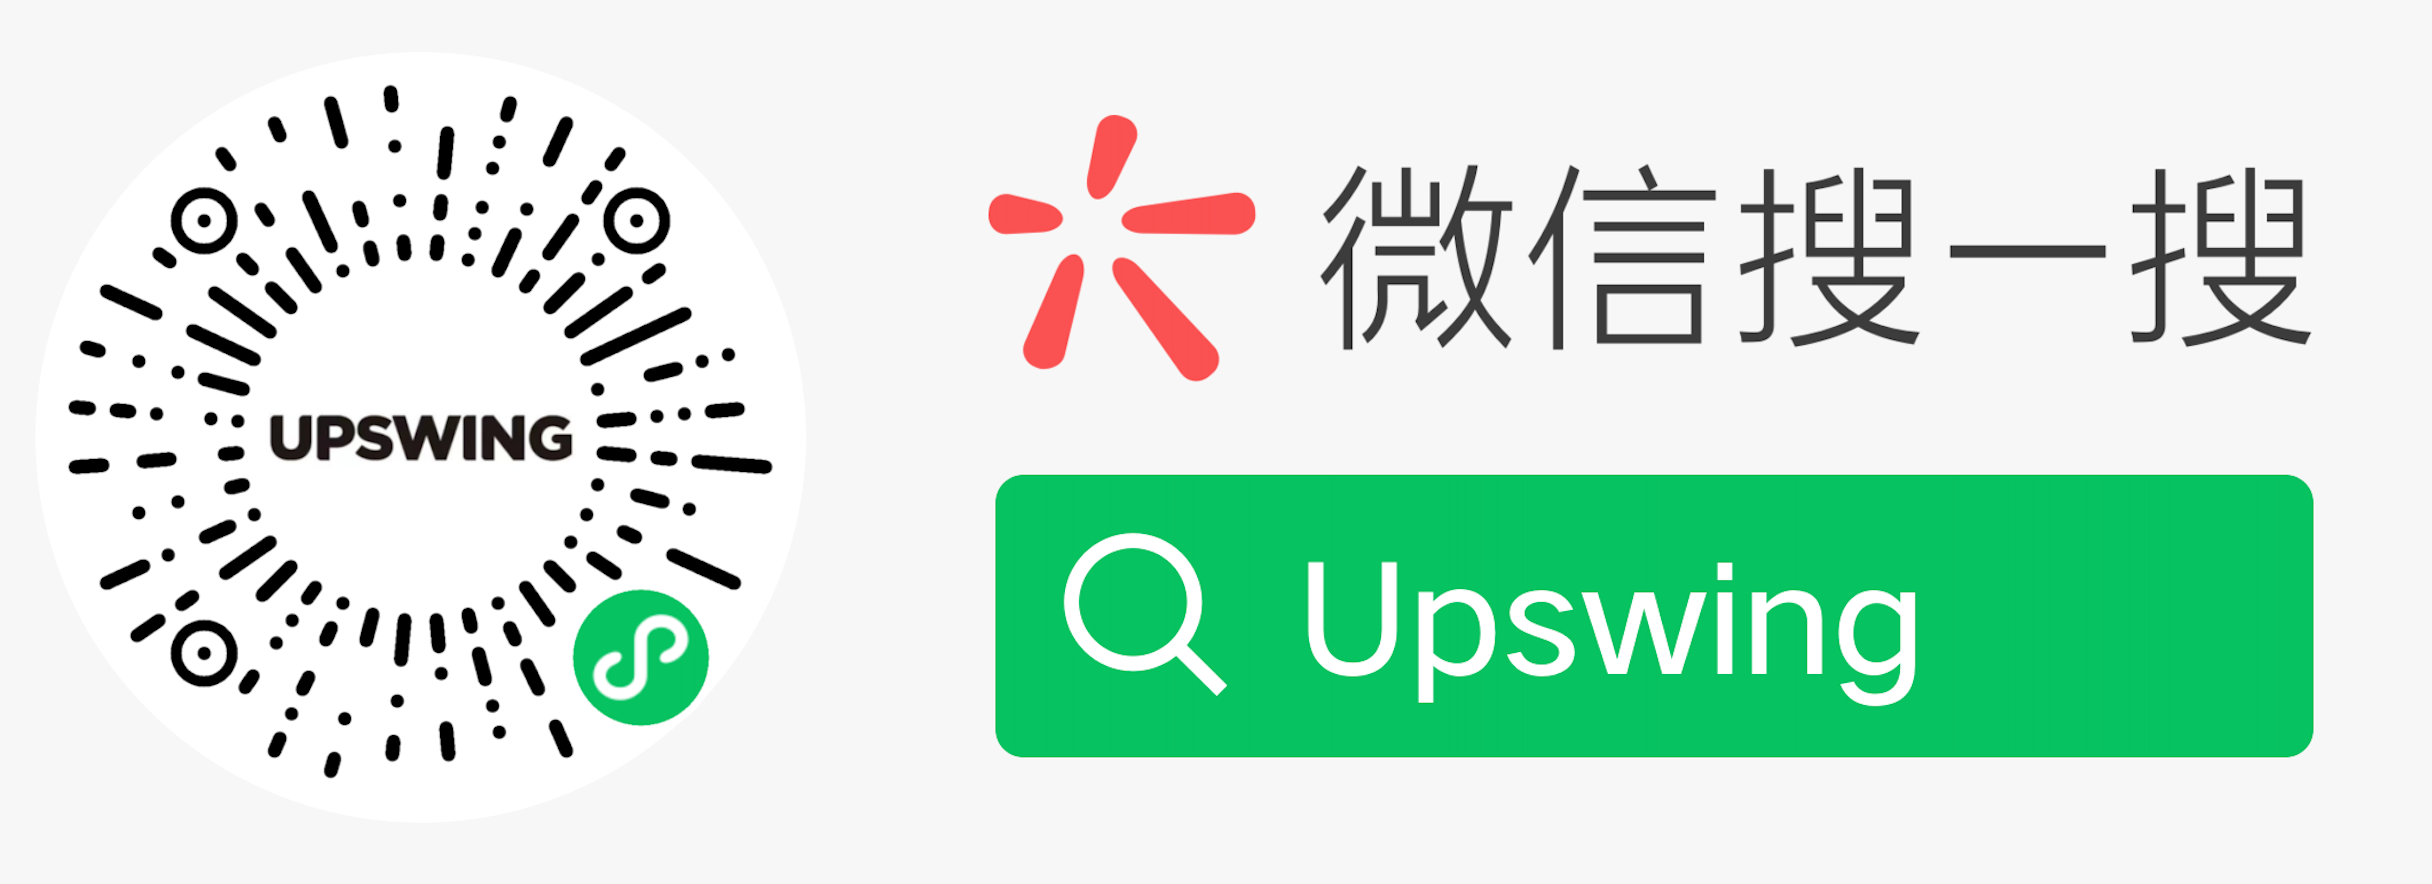 Upswing is available in China